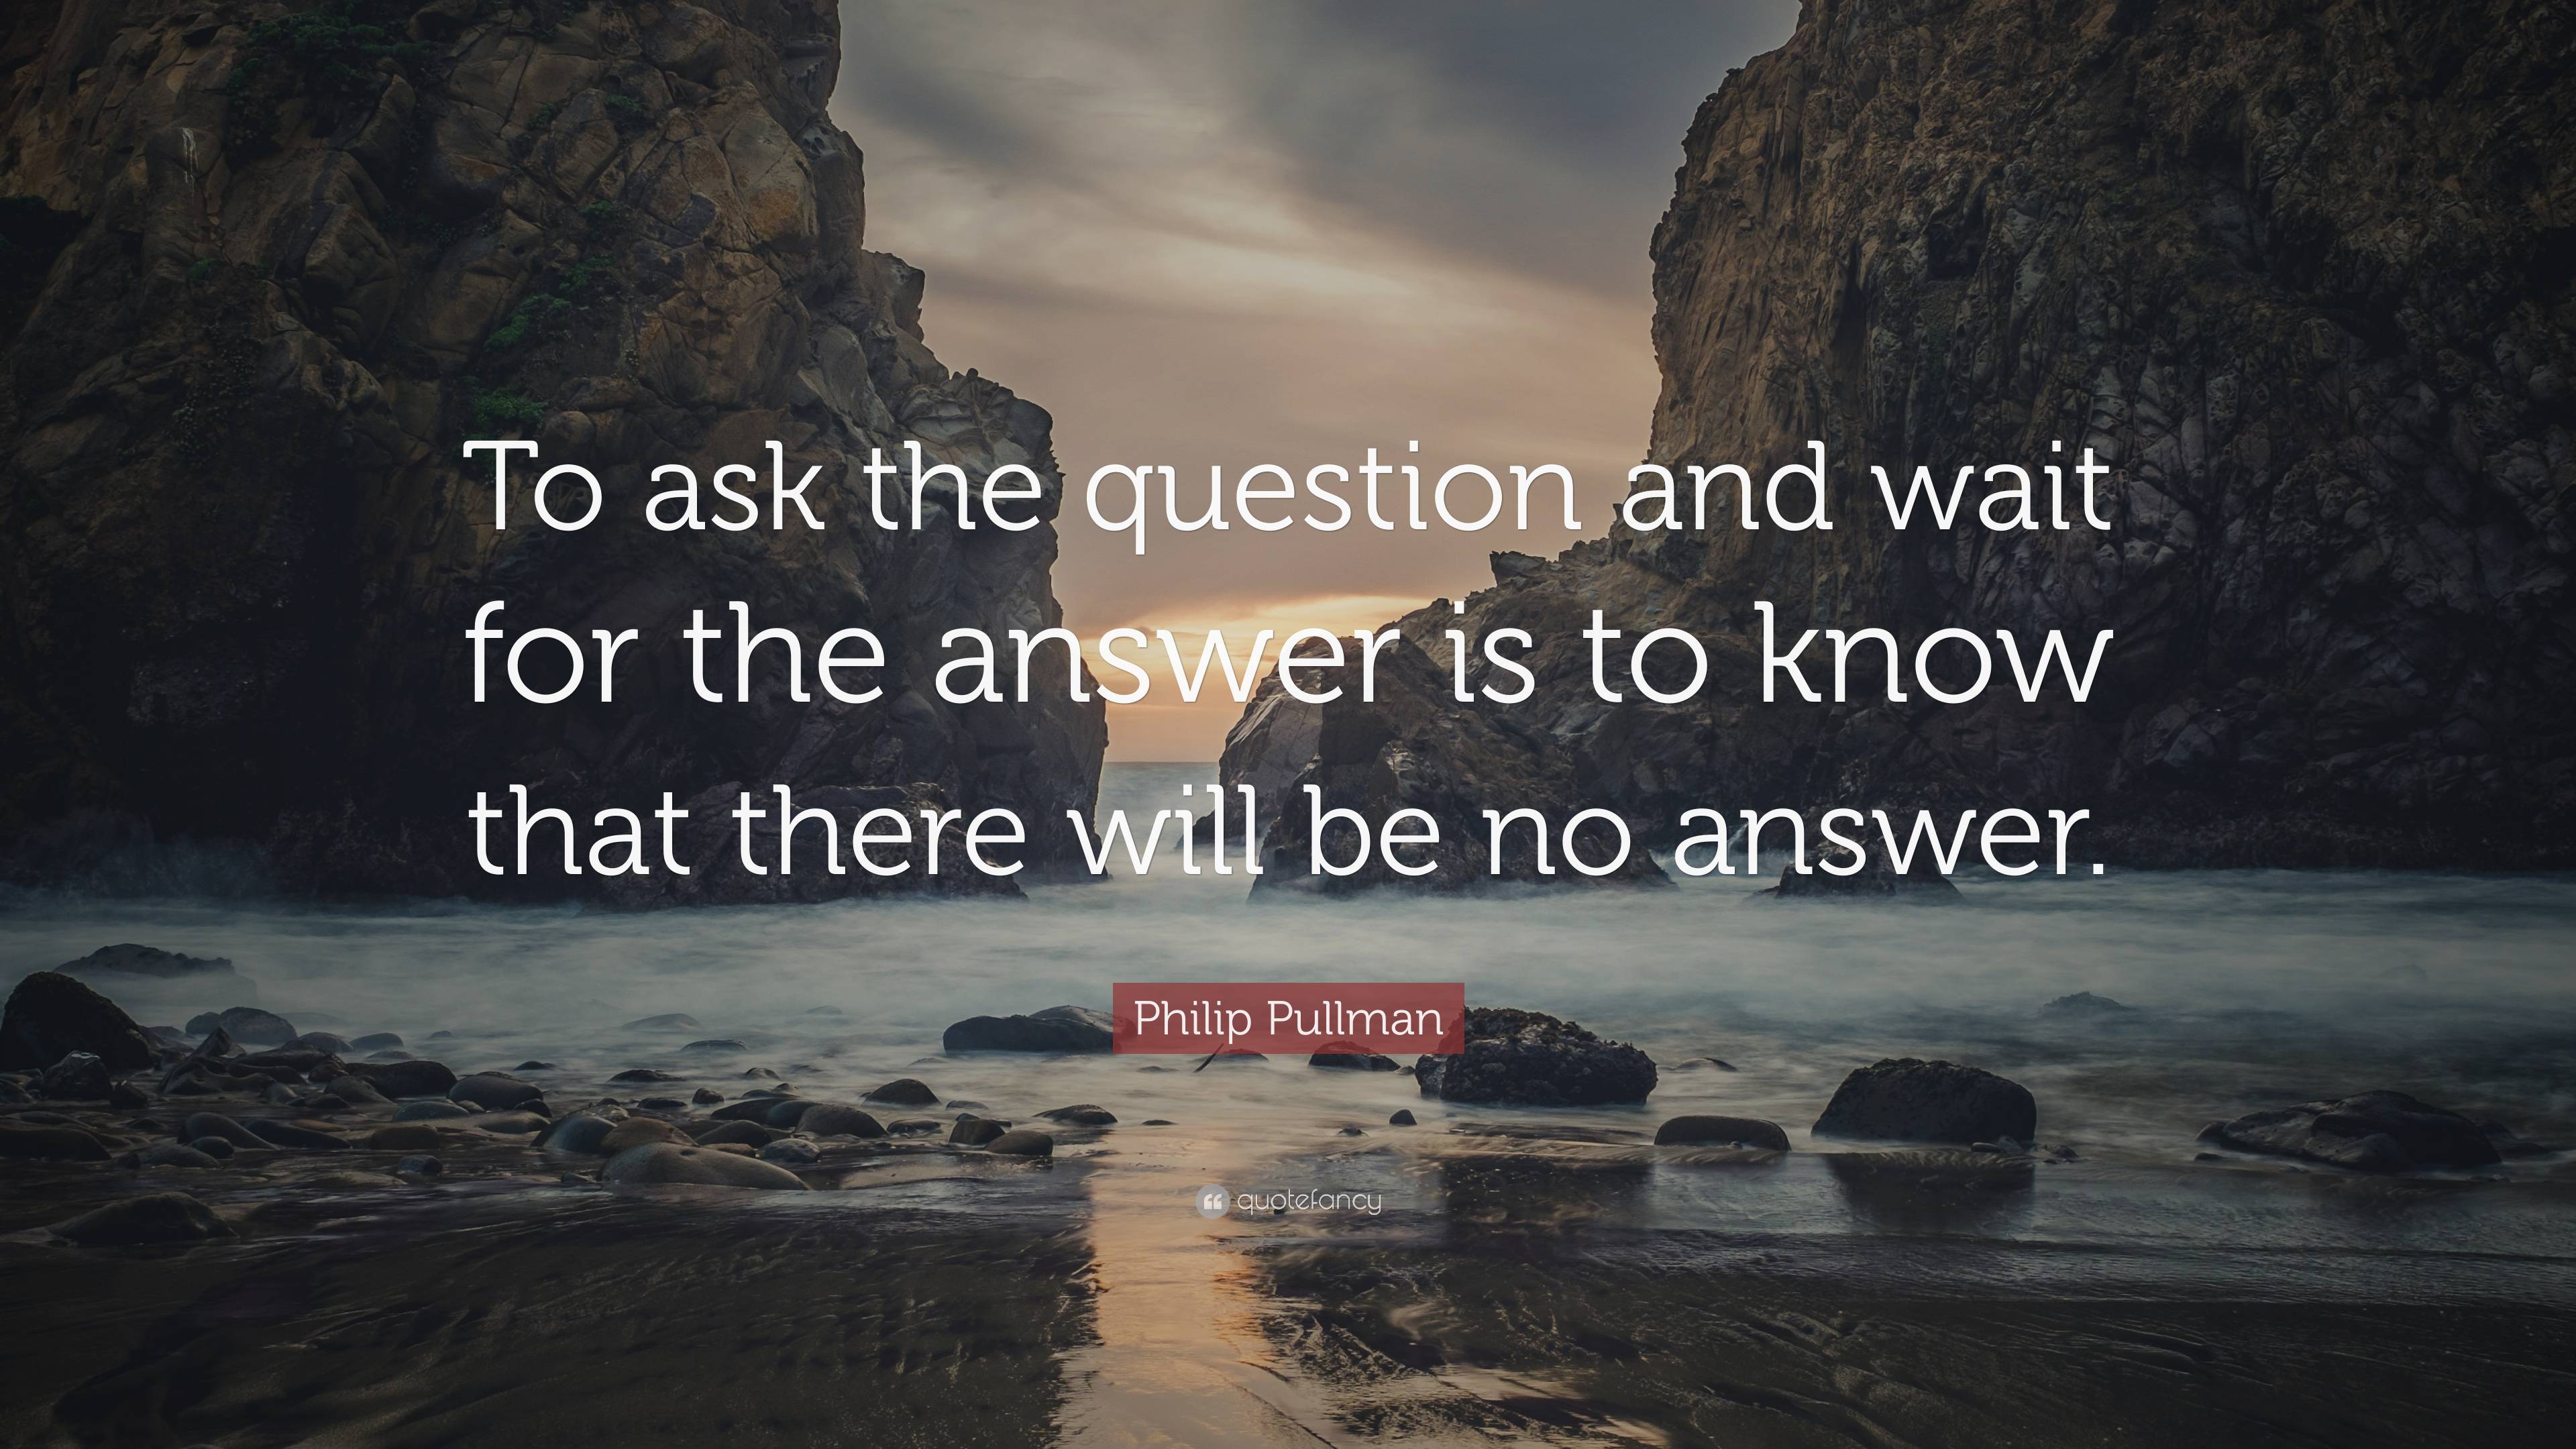 Philip Pullman Quote: “To ask the question and wait for the answer is ...